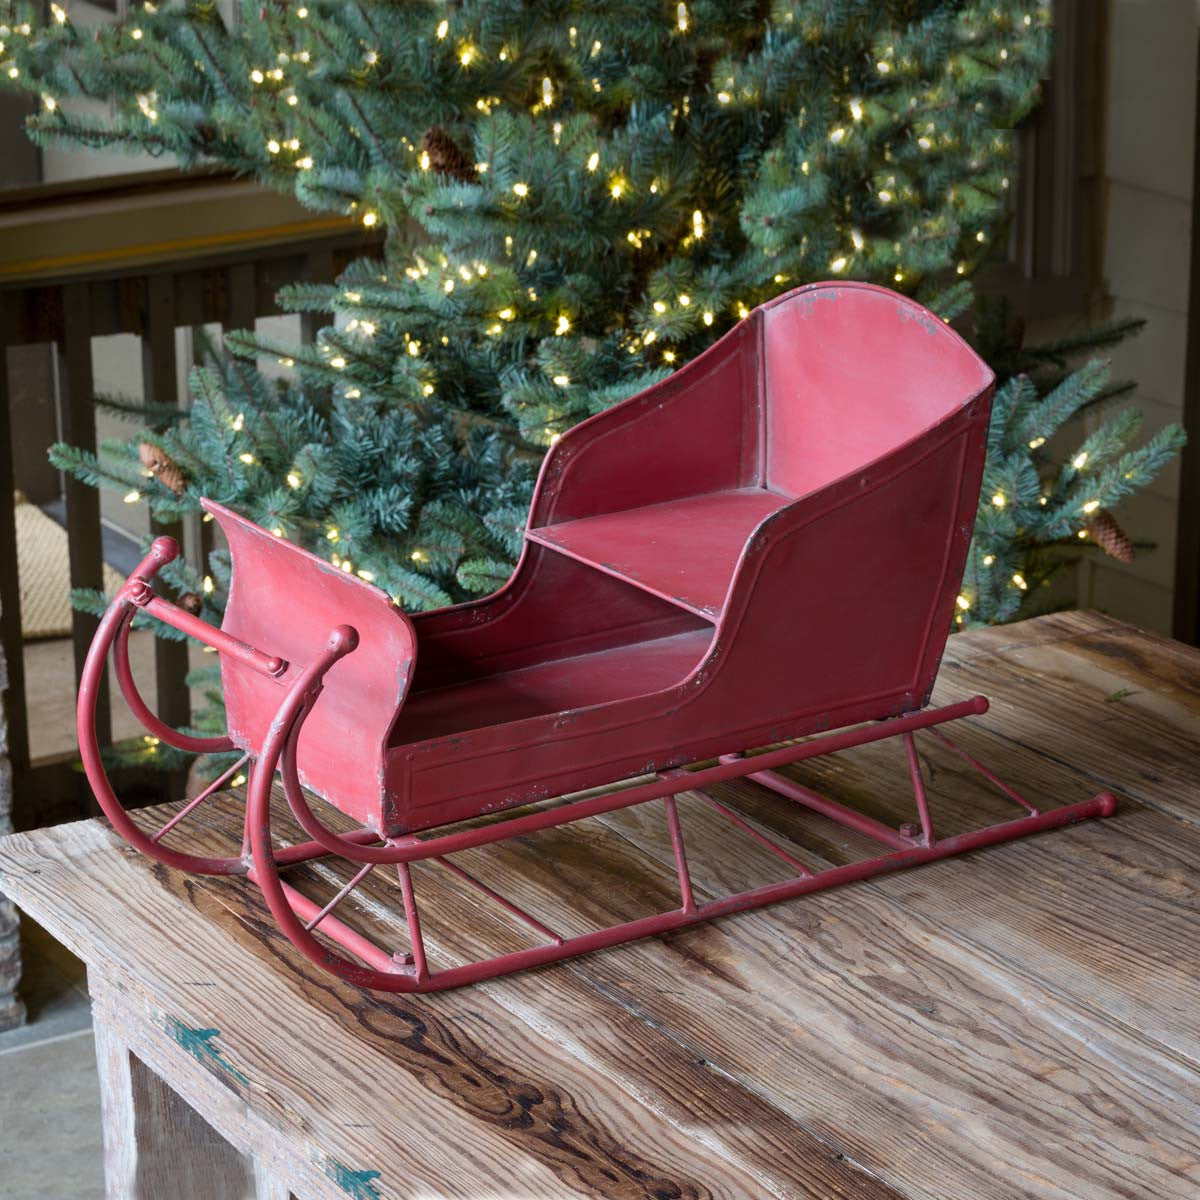 red-metal-vintage-sleigh-in-front-of-green-christmas-tree-with-lights